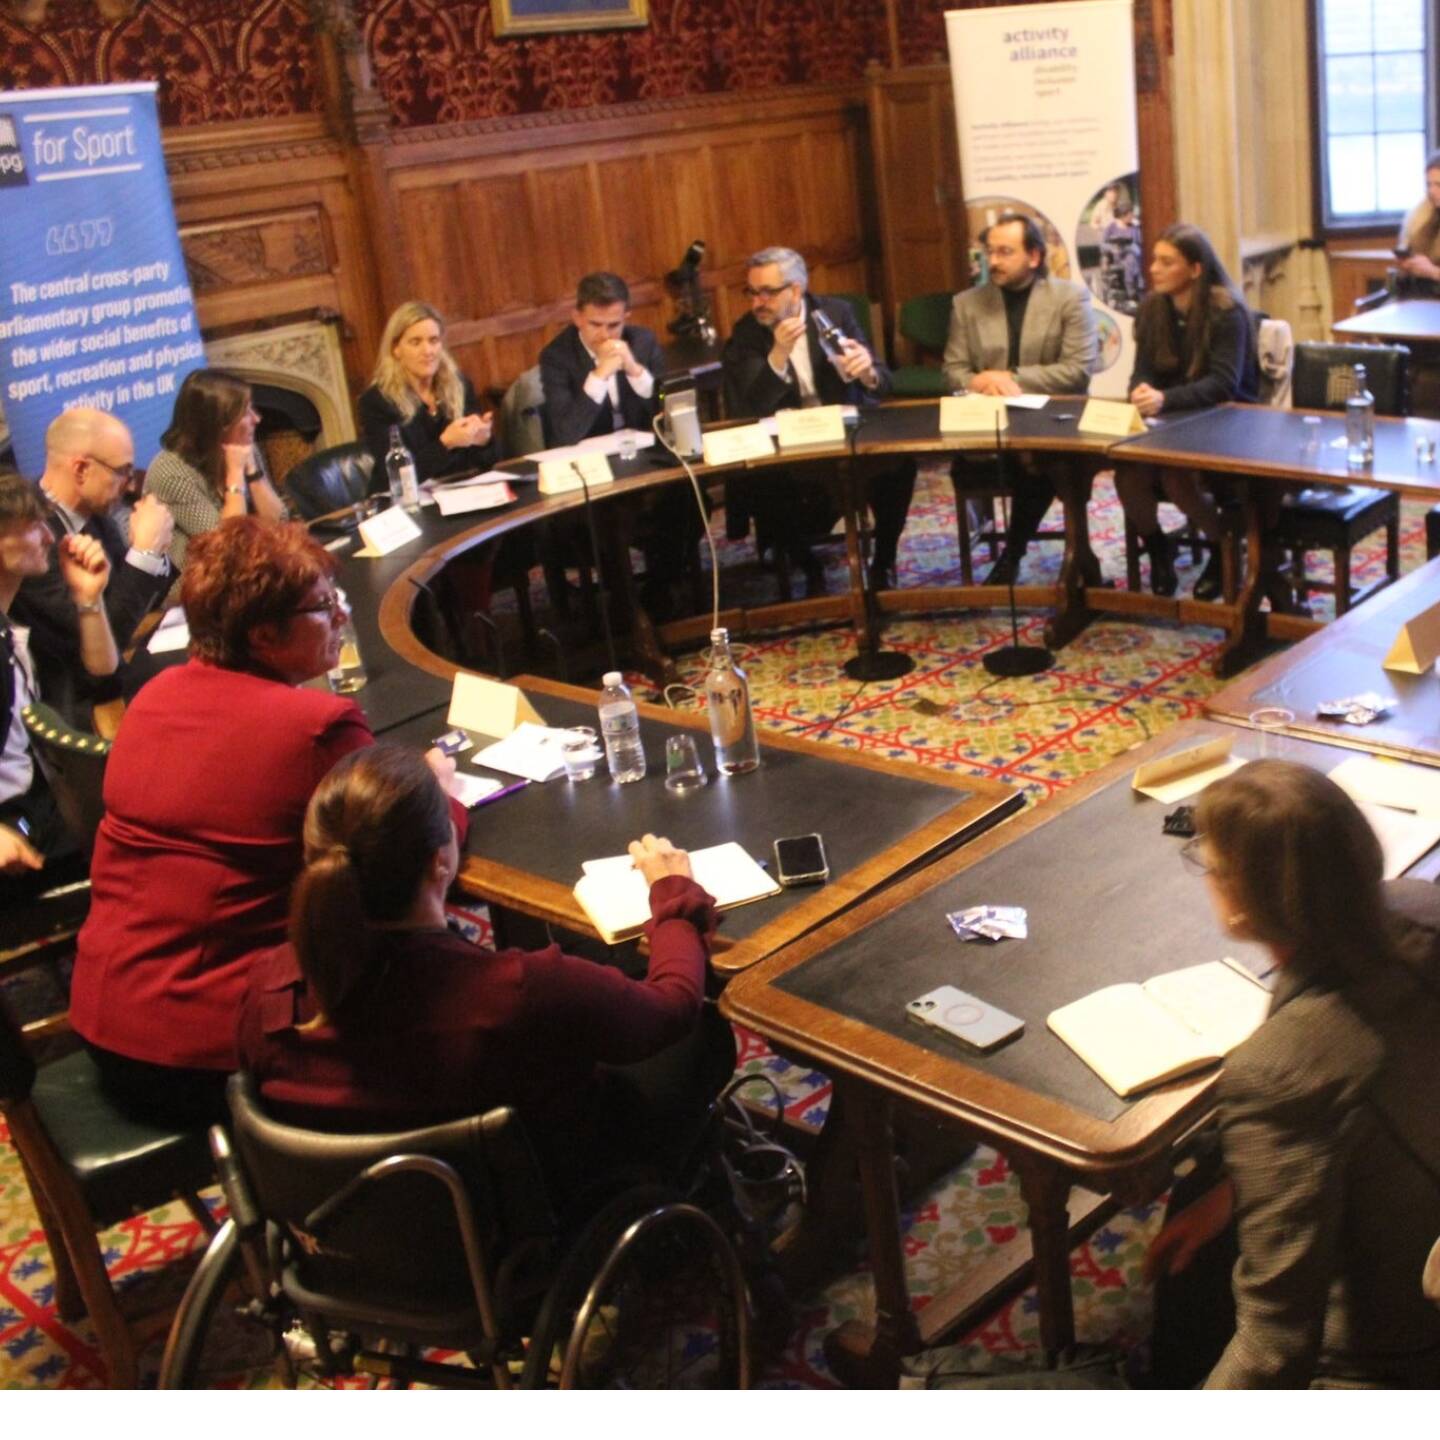 A group of leaders discussing disabled people's participation at parliament event